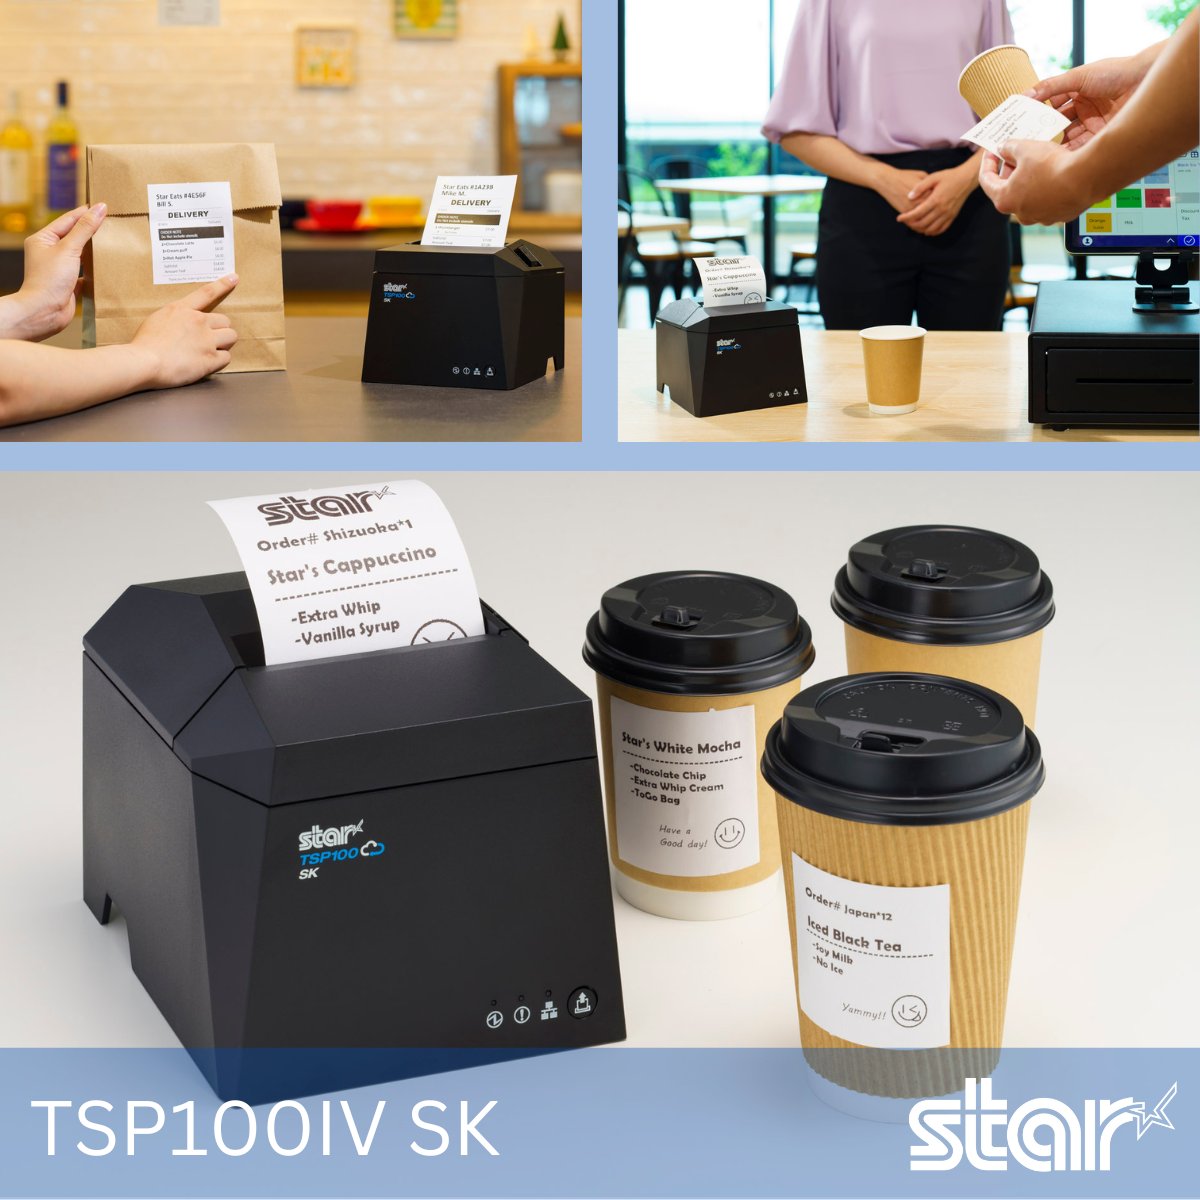 Introducing the TSP100IV Series Linerless Sticky Label Printer! Seamless integration with existing POS systems, mPOS ready with dual interface (USB and Ethernet), cloud-connected for efficiency, compact design, and eco-friendly with linerless printing. #StarInnovation